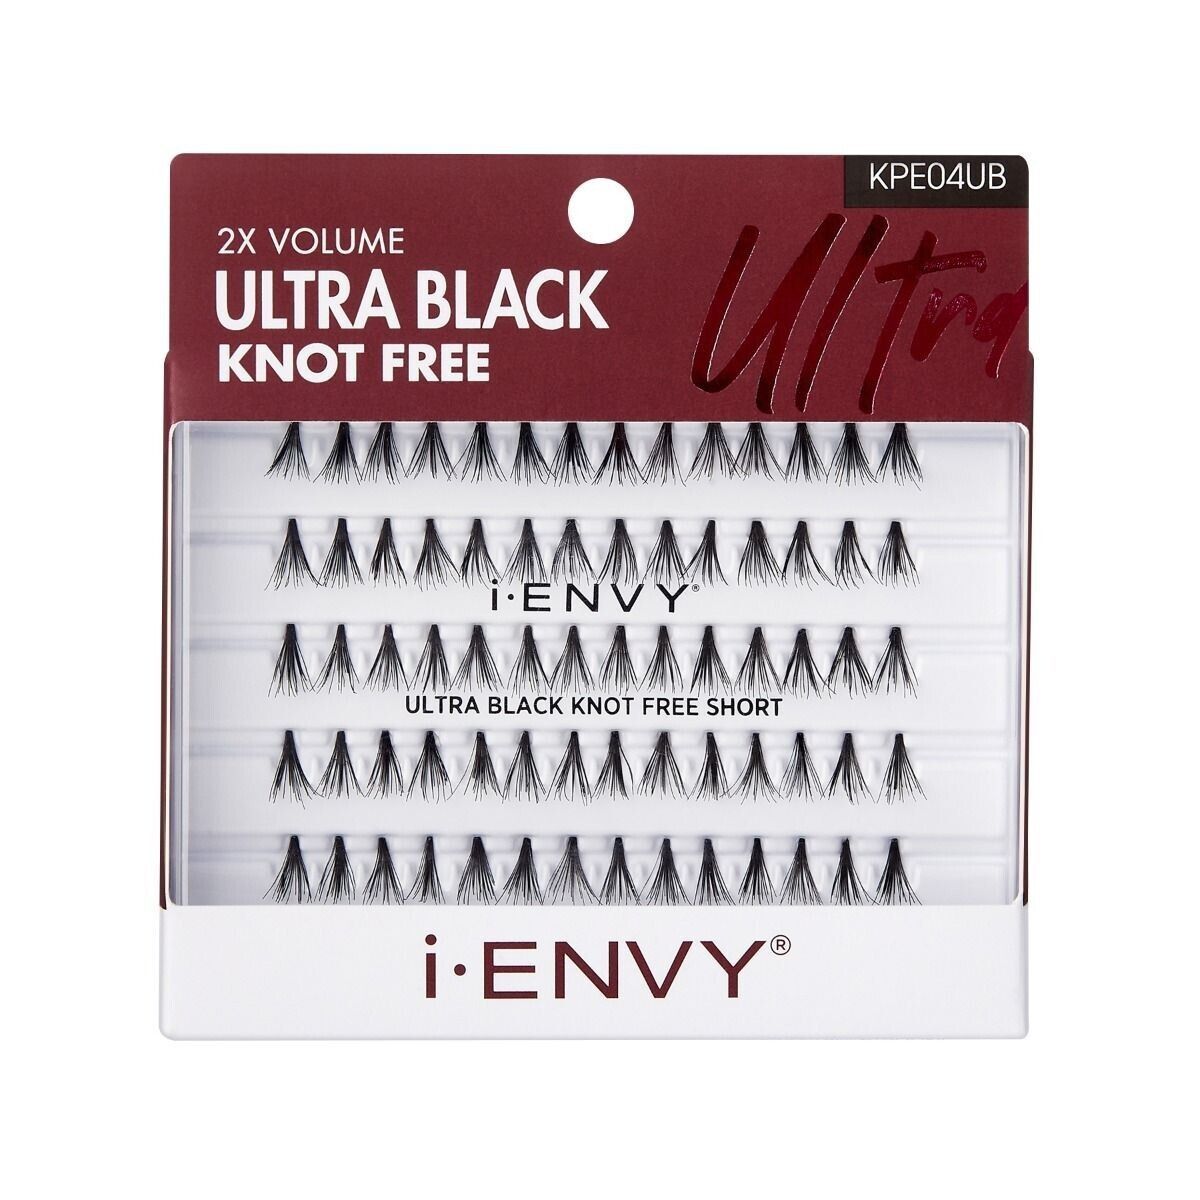 Primary image for I ENVY BY KISS 2x VOLUME ULTRA BLACK KNOT FREE SHORT LASHES KPE04UB